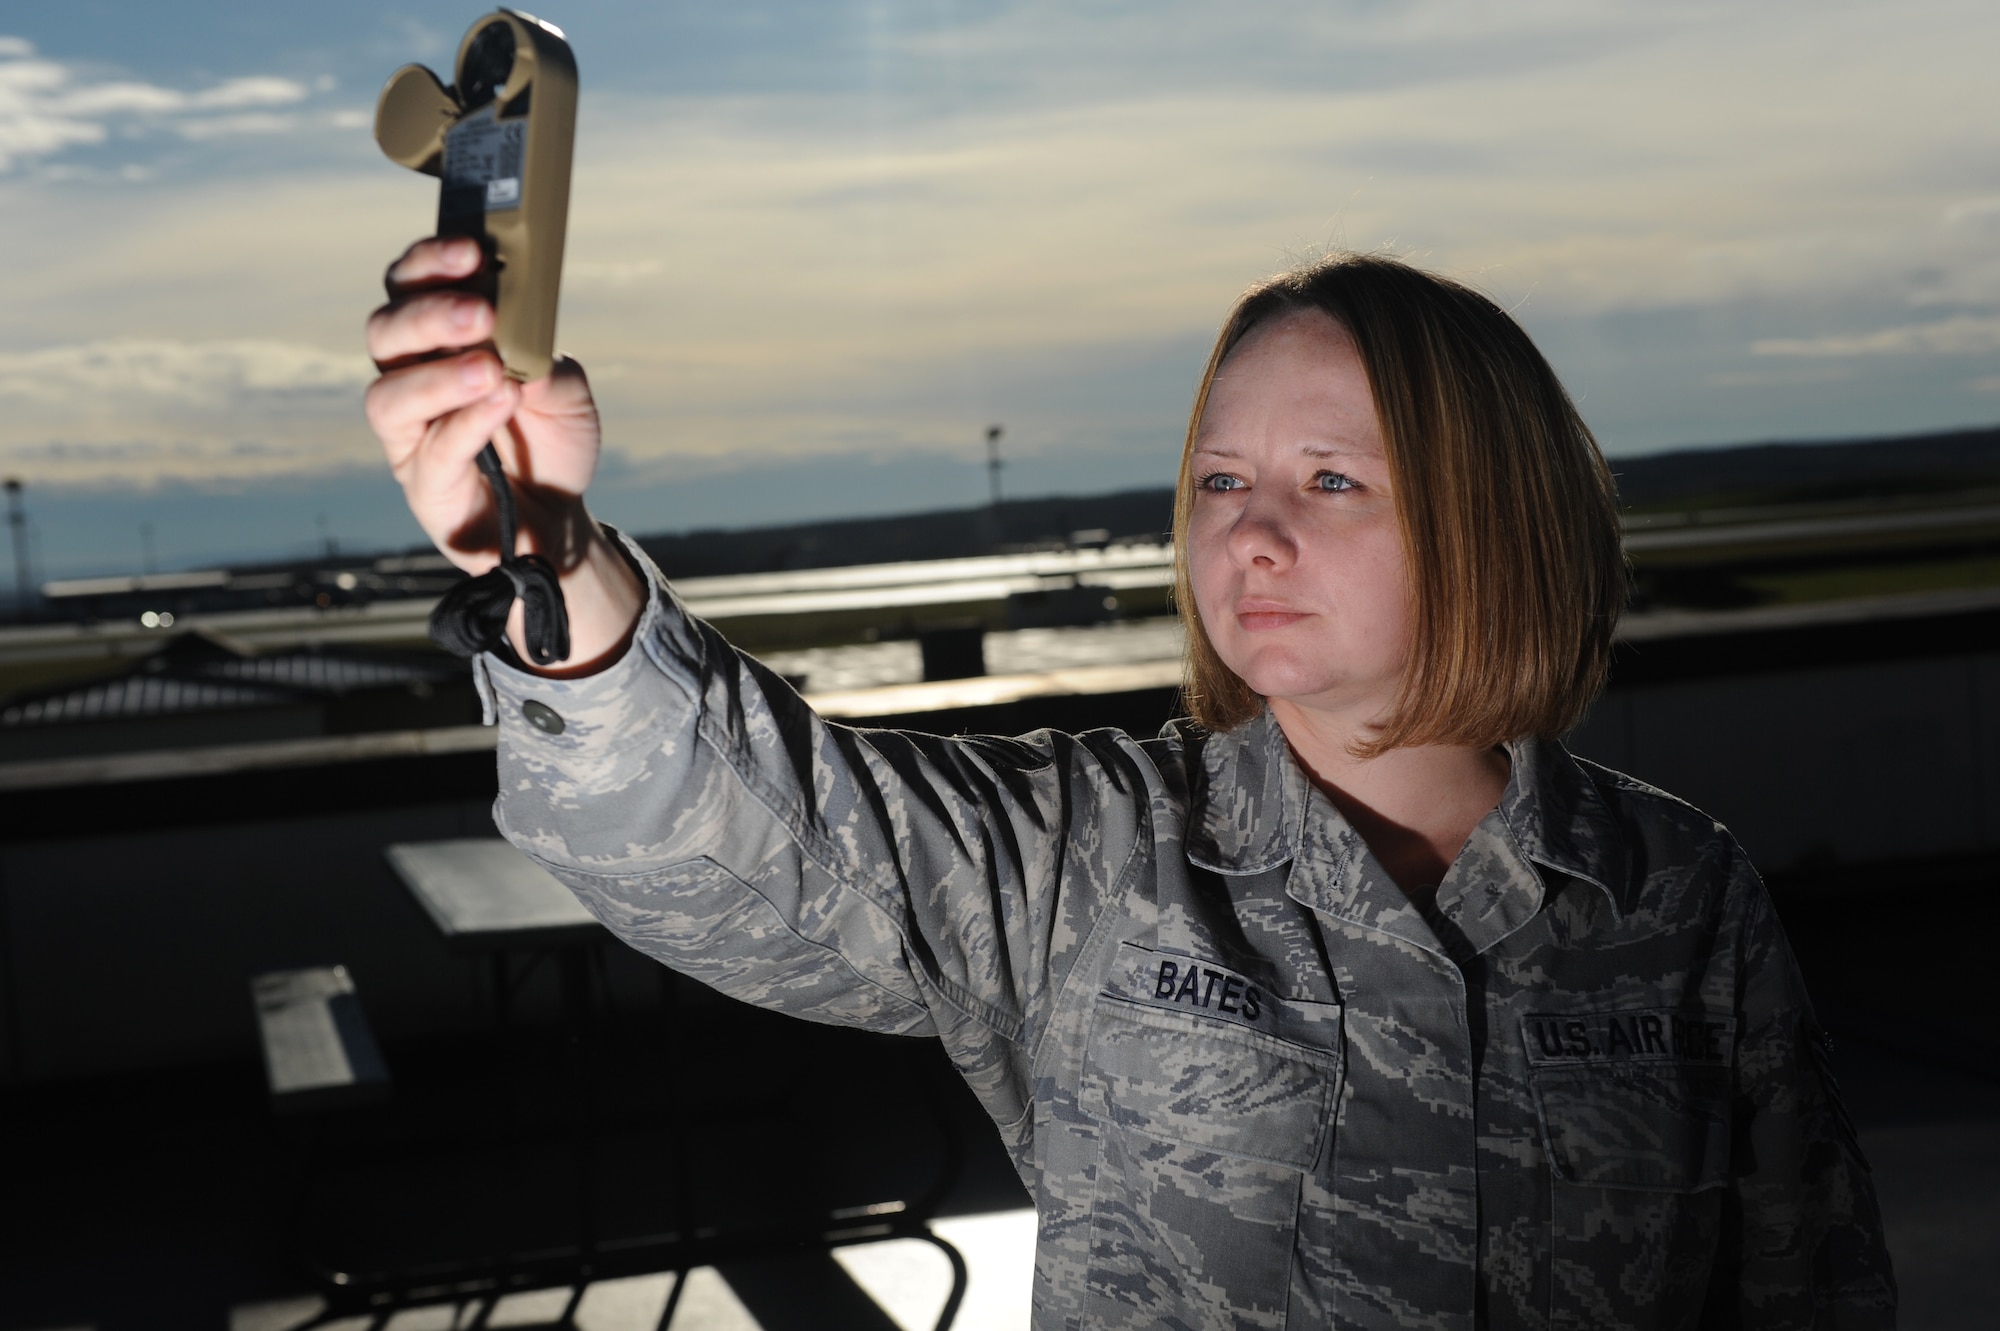 SPANGDAHLEM AIR BASE, Germany – Tech. Sgt. Sandy Bates, 52nd Operations Support Squadron weather technician, uses a Kestrel hand-held weather gauge to monitor wind speeds and visibility here Nov. 4. The 52nd OSS Weather Flight received an “Excellent” rating on its Standardization and Evaluation Program for Weather Operations inspection after demonstrating their ability to provide safe and efficient air-traffic service to the 52nd Fighter Wing and 726th Air Mobility Squadron. (U.S. Air Force photo/Airman 1st Class Matthew B. Fredericks)